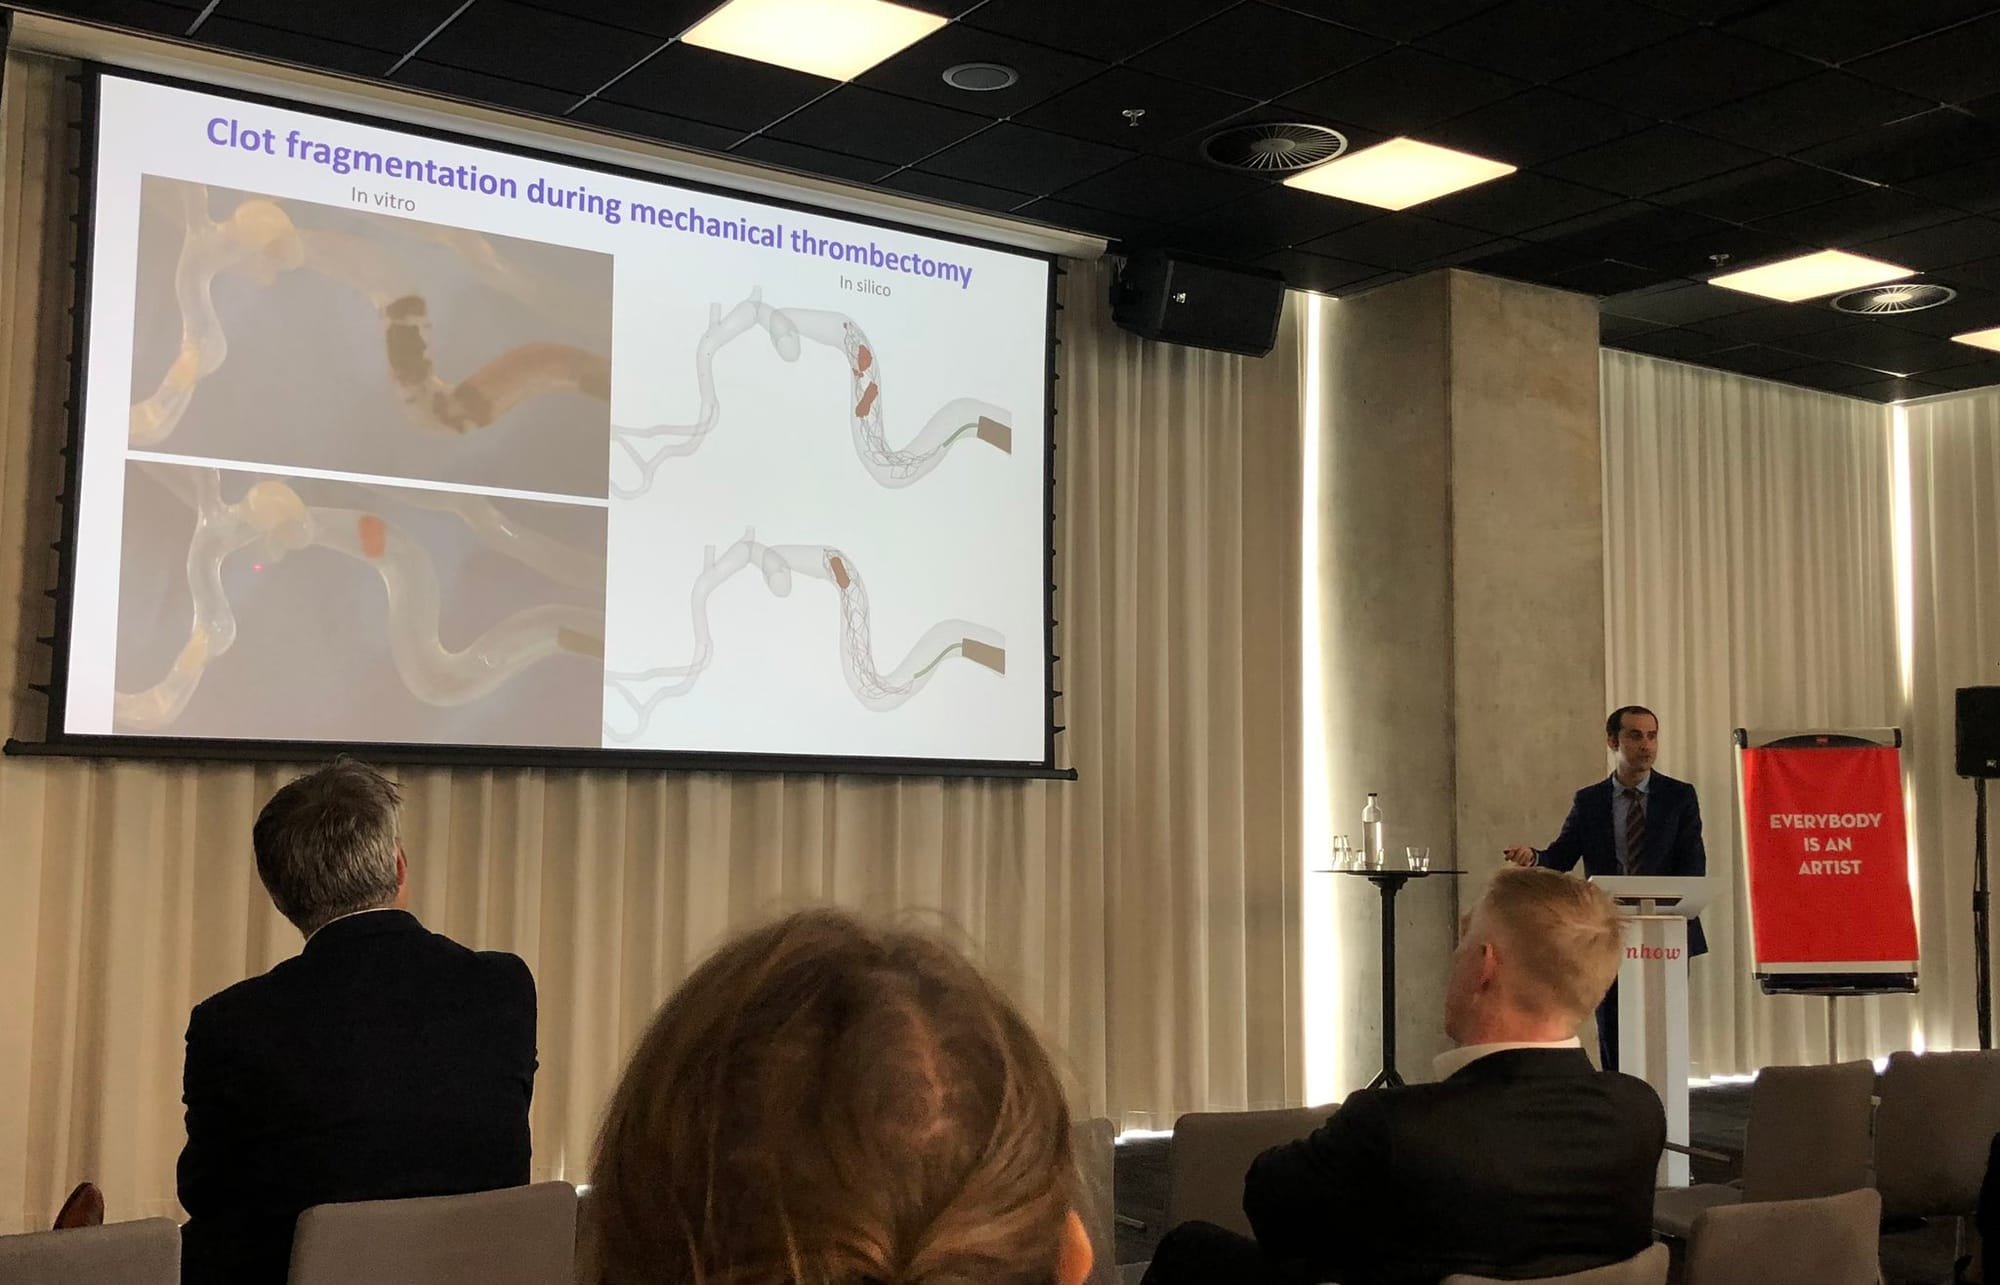 Behrooz and Yasmine Attend the Shearstress Symposium in Rotterdam - April 2022